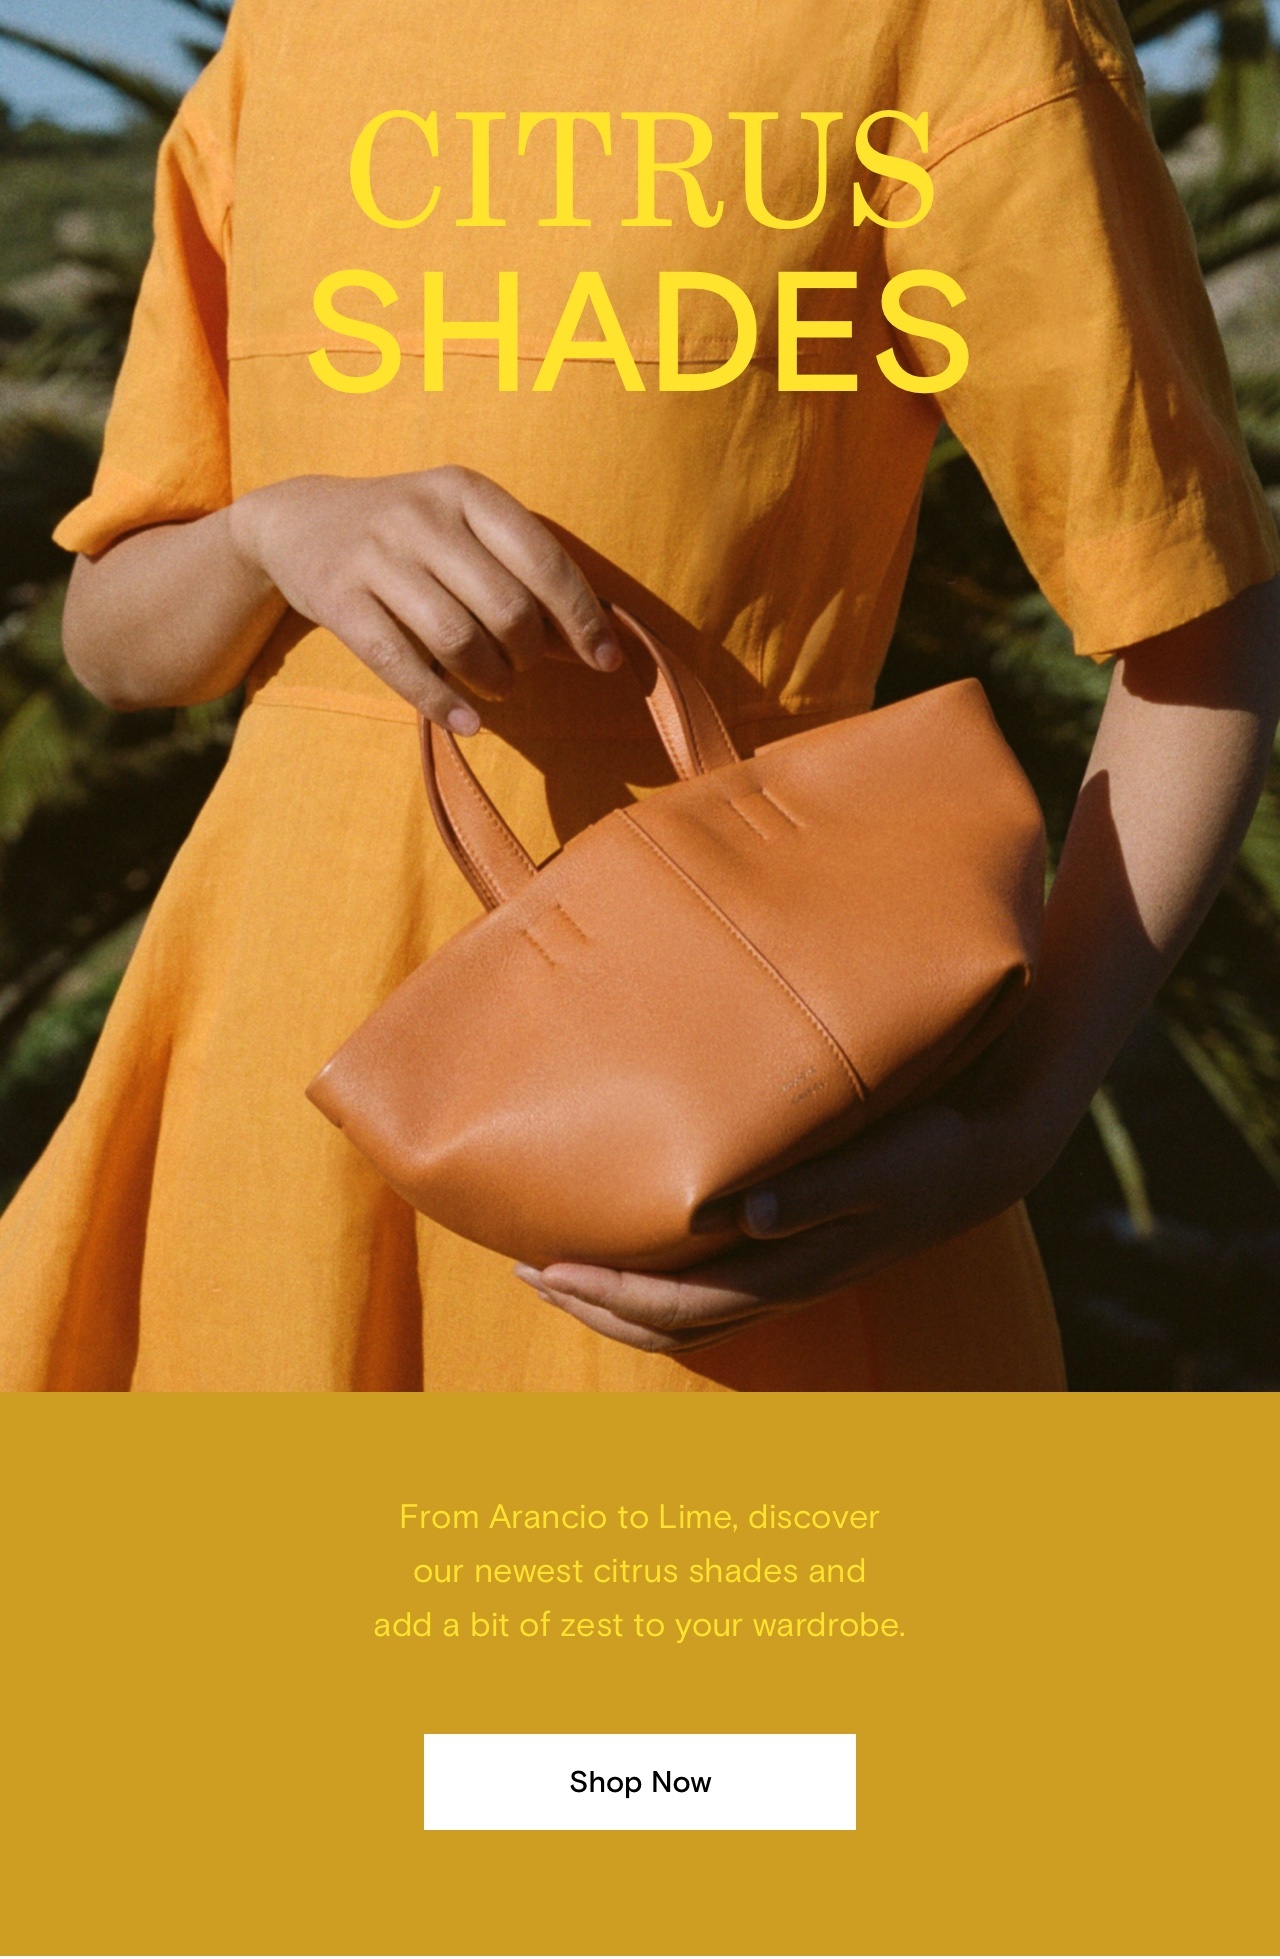 From Arancio to Lime, discover our newest citrus shades and add a bit of zest to your wardrobe.